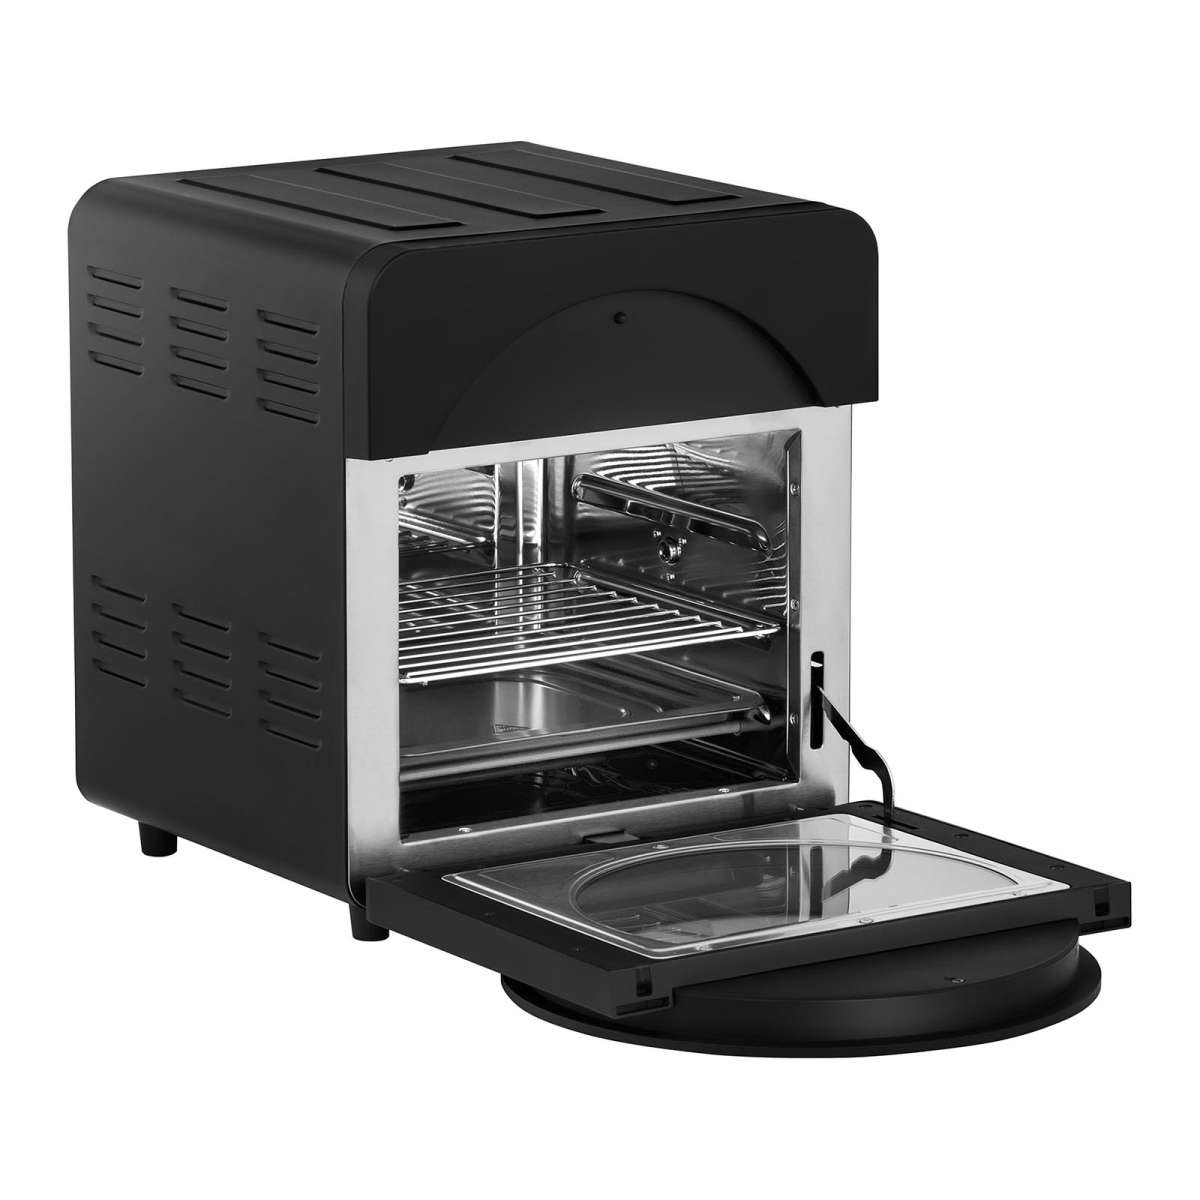 Countertop Convection Oven - 1,700 W - 12 programmes - incl. oven rack ...